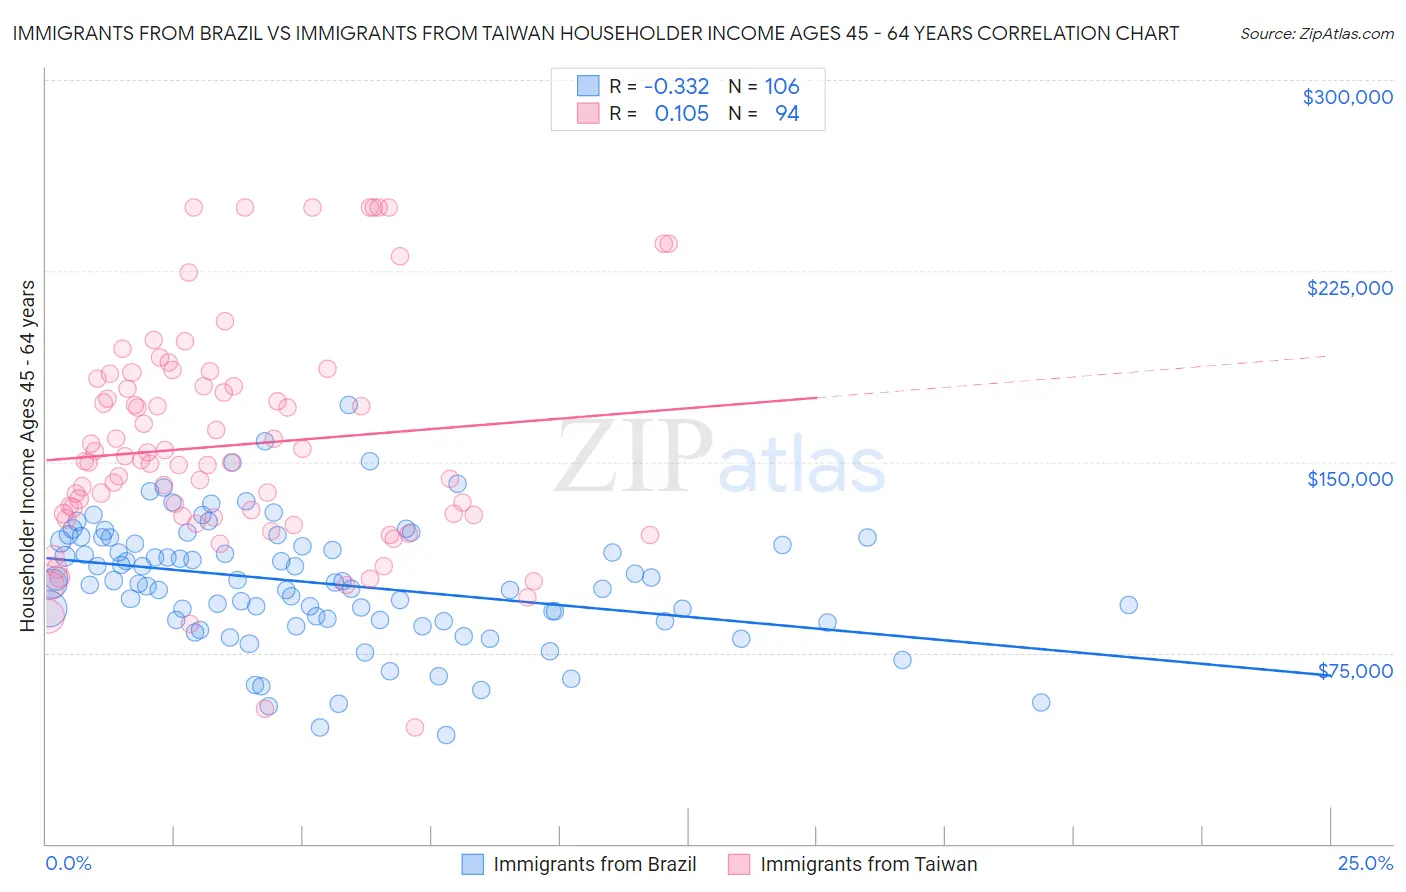 Immigrants from Brazil vs Immigrants from Taiwan Householder Income Ages 45 - 64 years